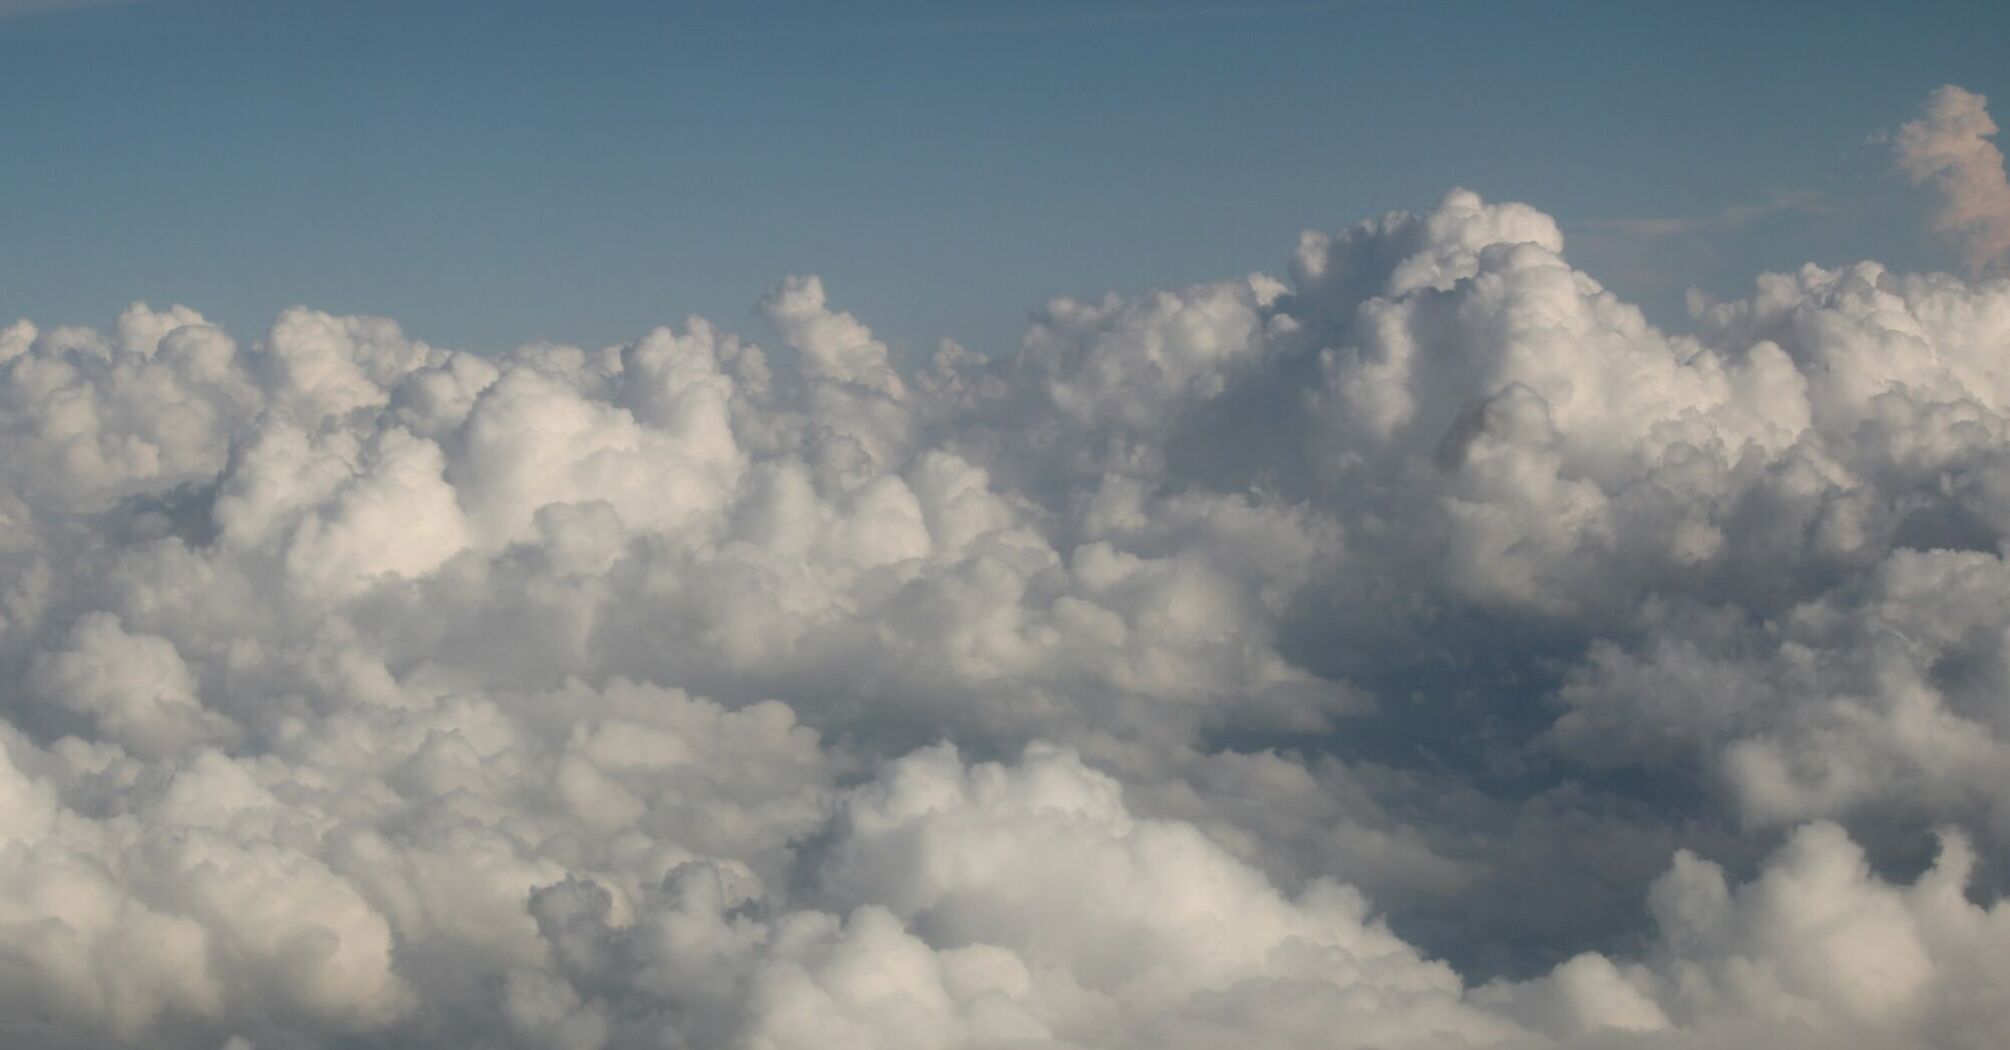 Dense cloud formations seen from an airplane